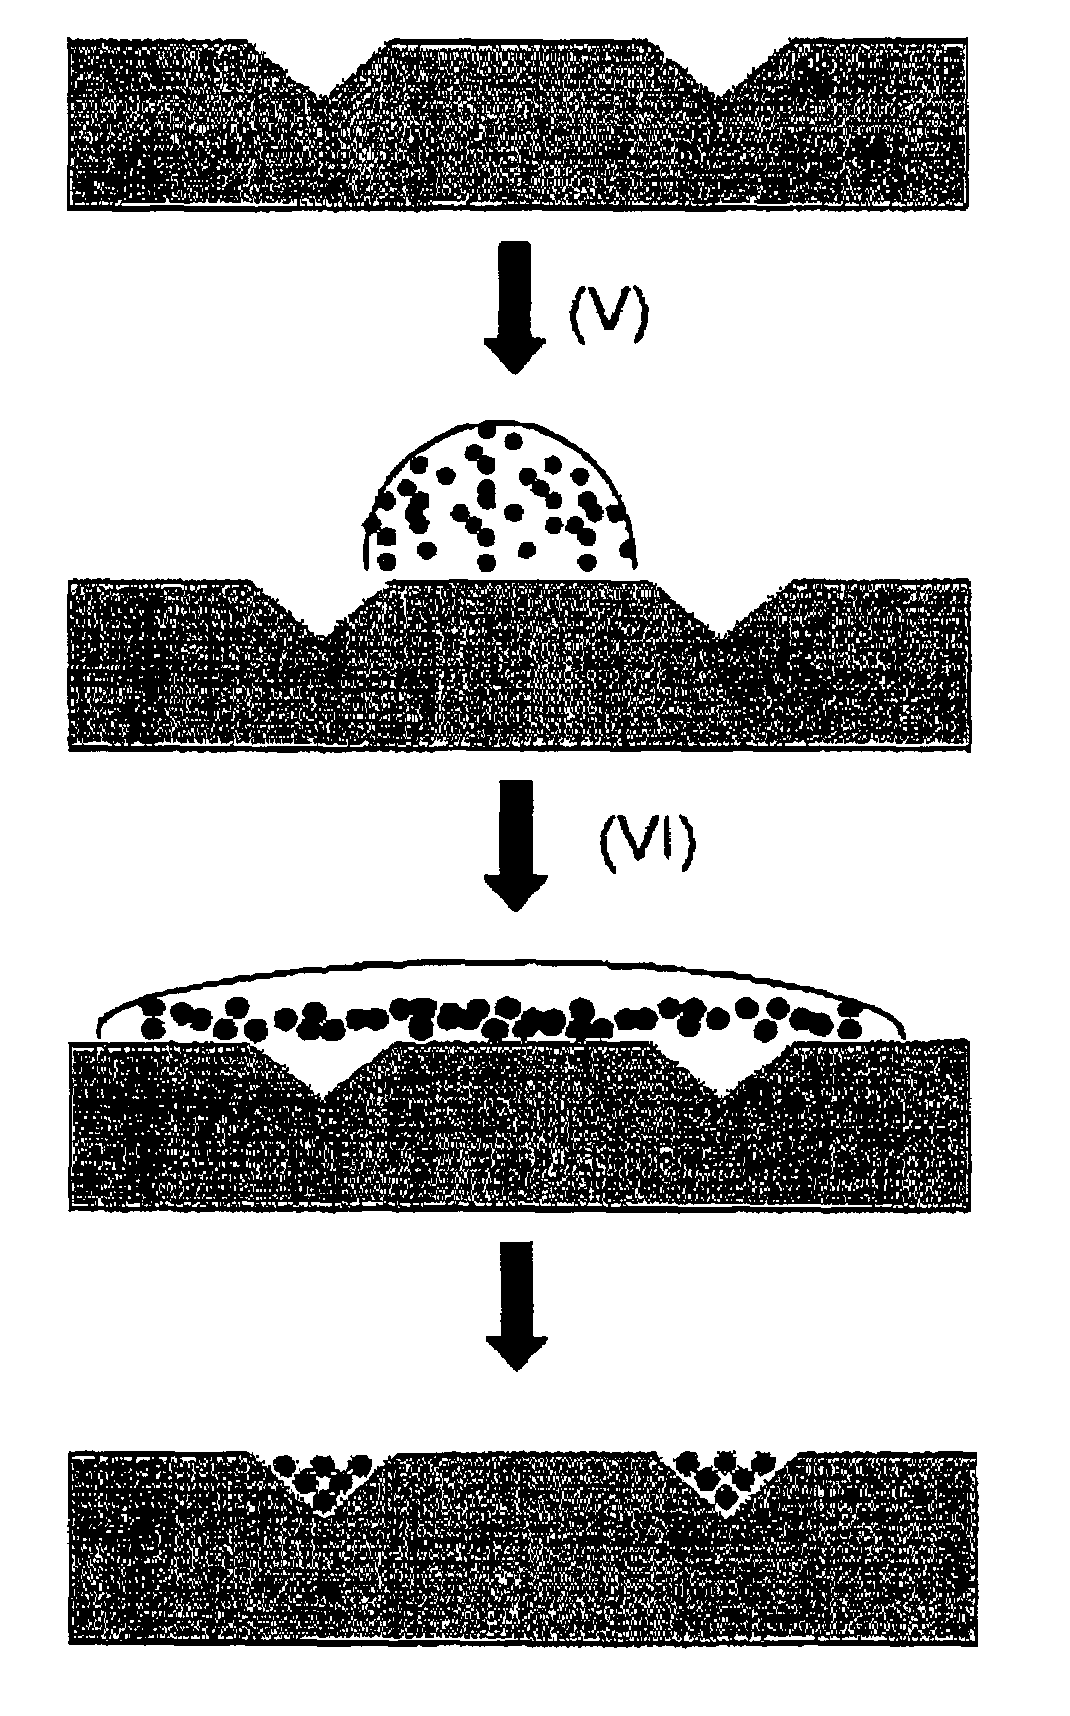 Composite materials having substrates with self-assembled colloidal crystalline patterns thereon